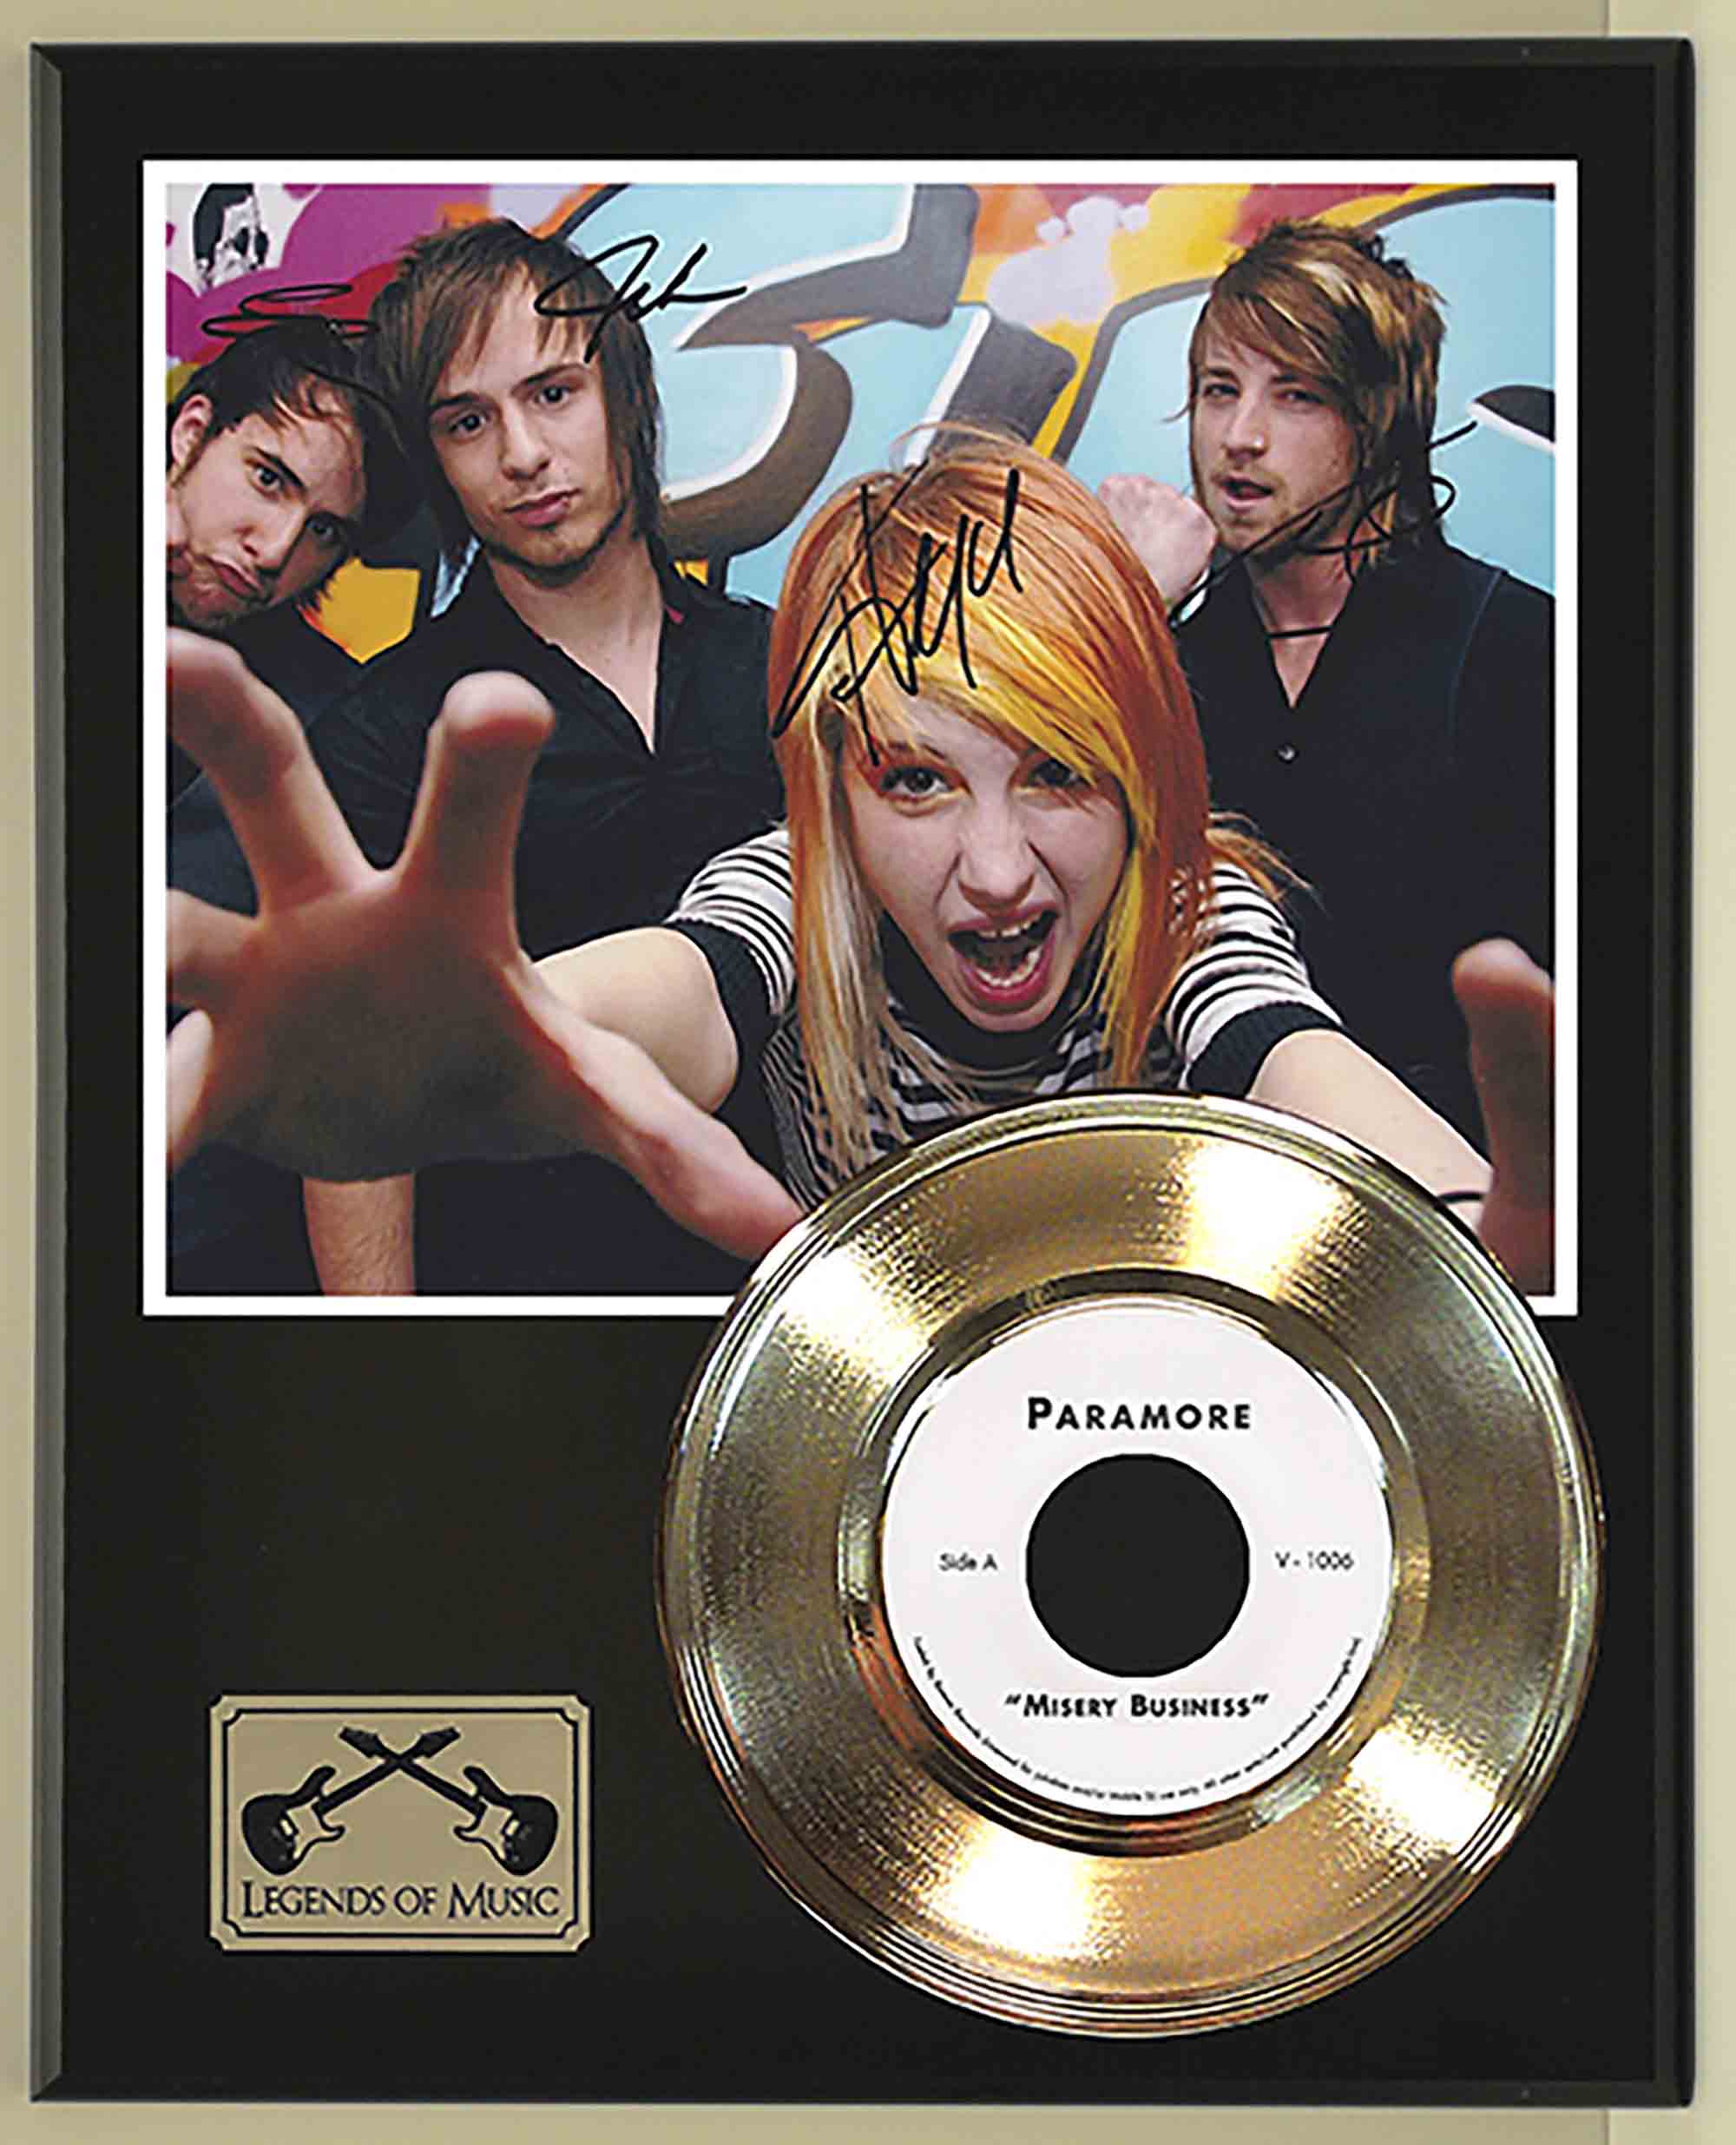 Paramore - Misery Business Gold 45 Record Ltd Edition Display Award Quality  - Gold Record Outlet Album and Disc Collectible Memorabilia